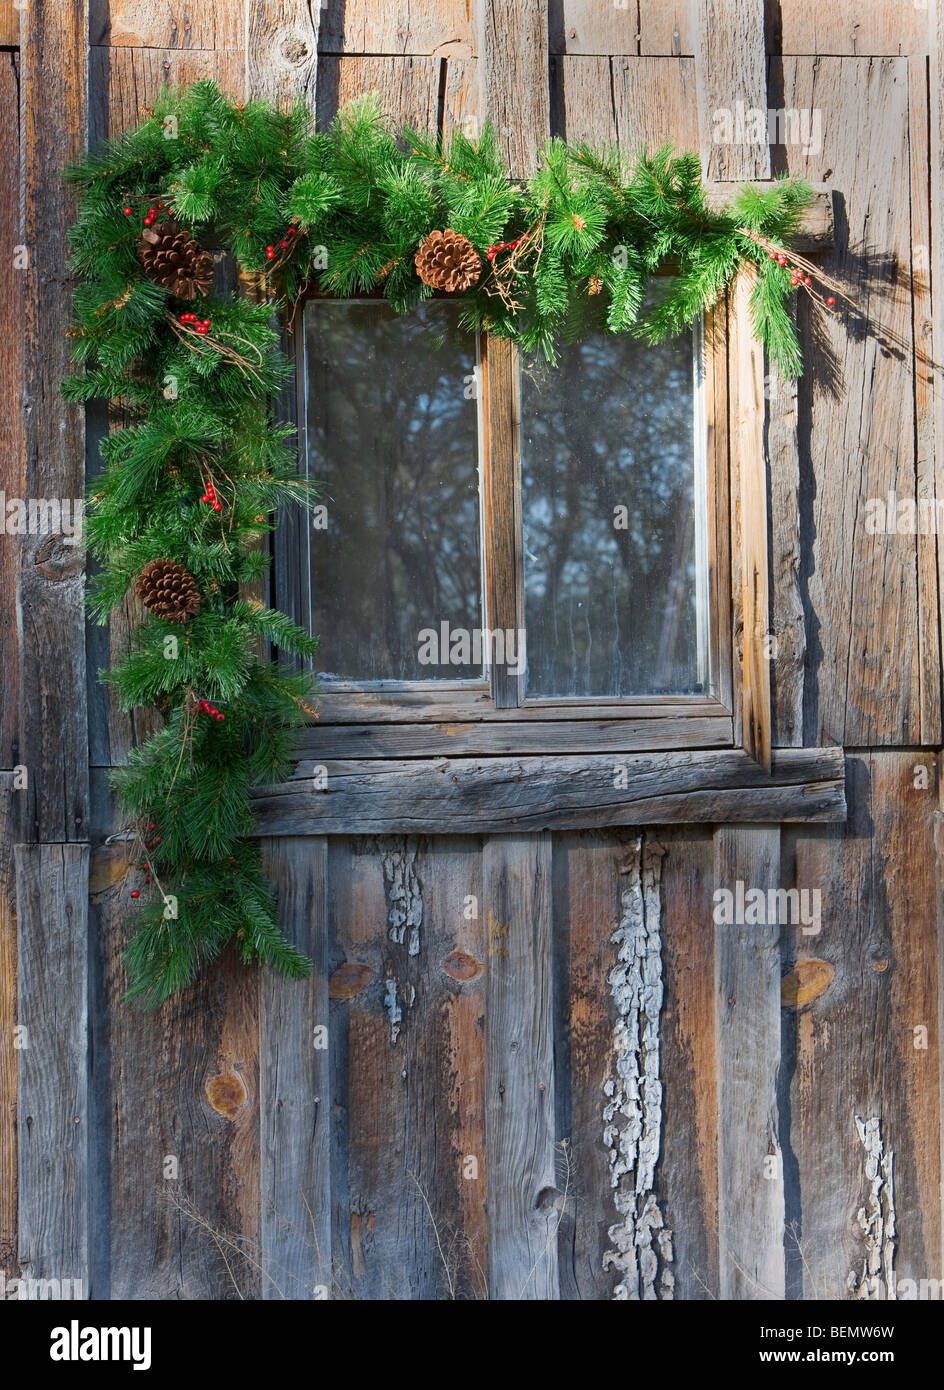 Christmas holiday decoration trim around an old house or barn. Stock Photo